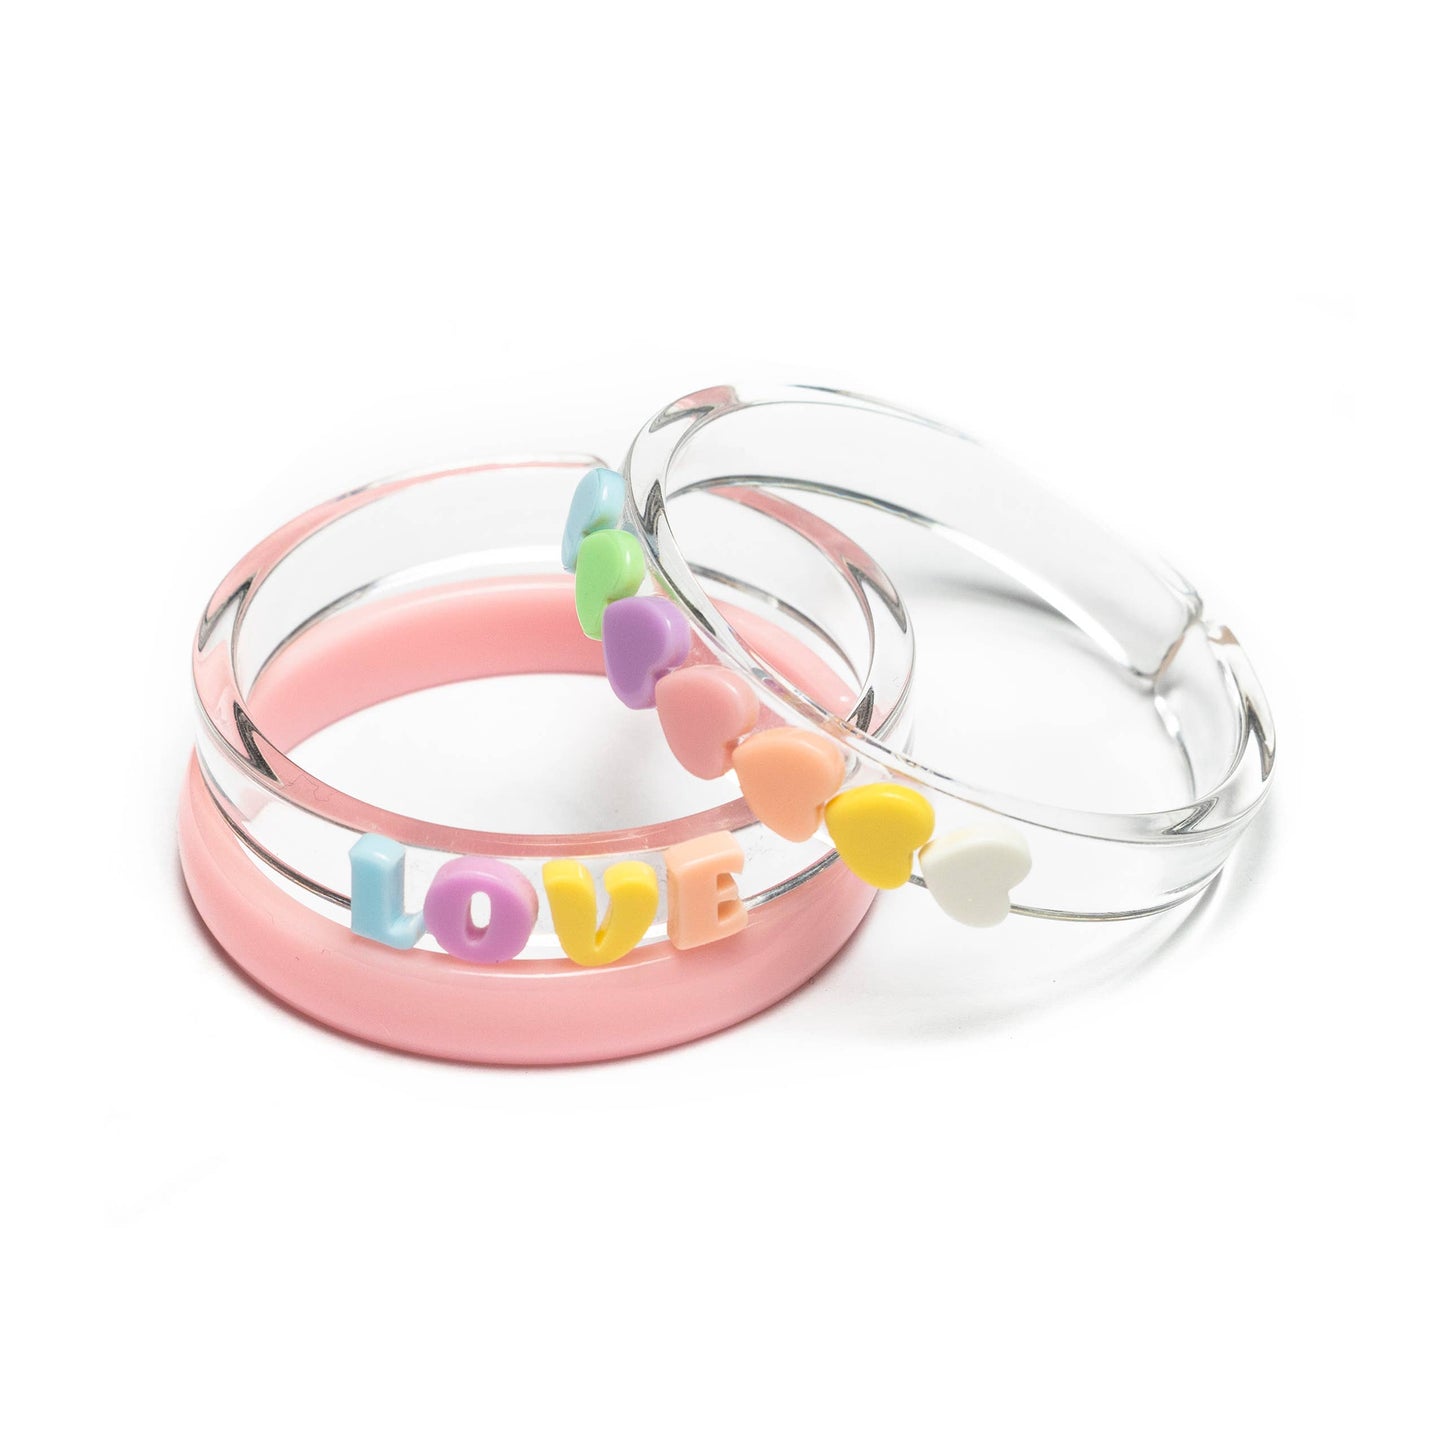 Candy Color Love Hearts Bangle Set/3 - Einstein's Attic